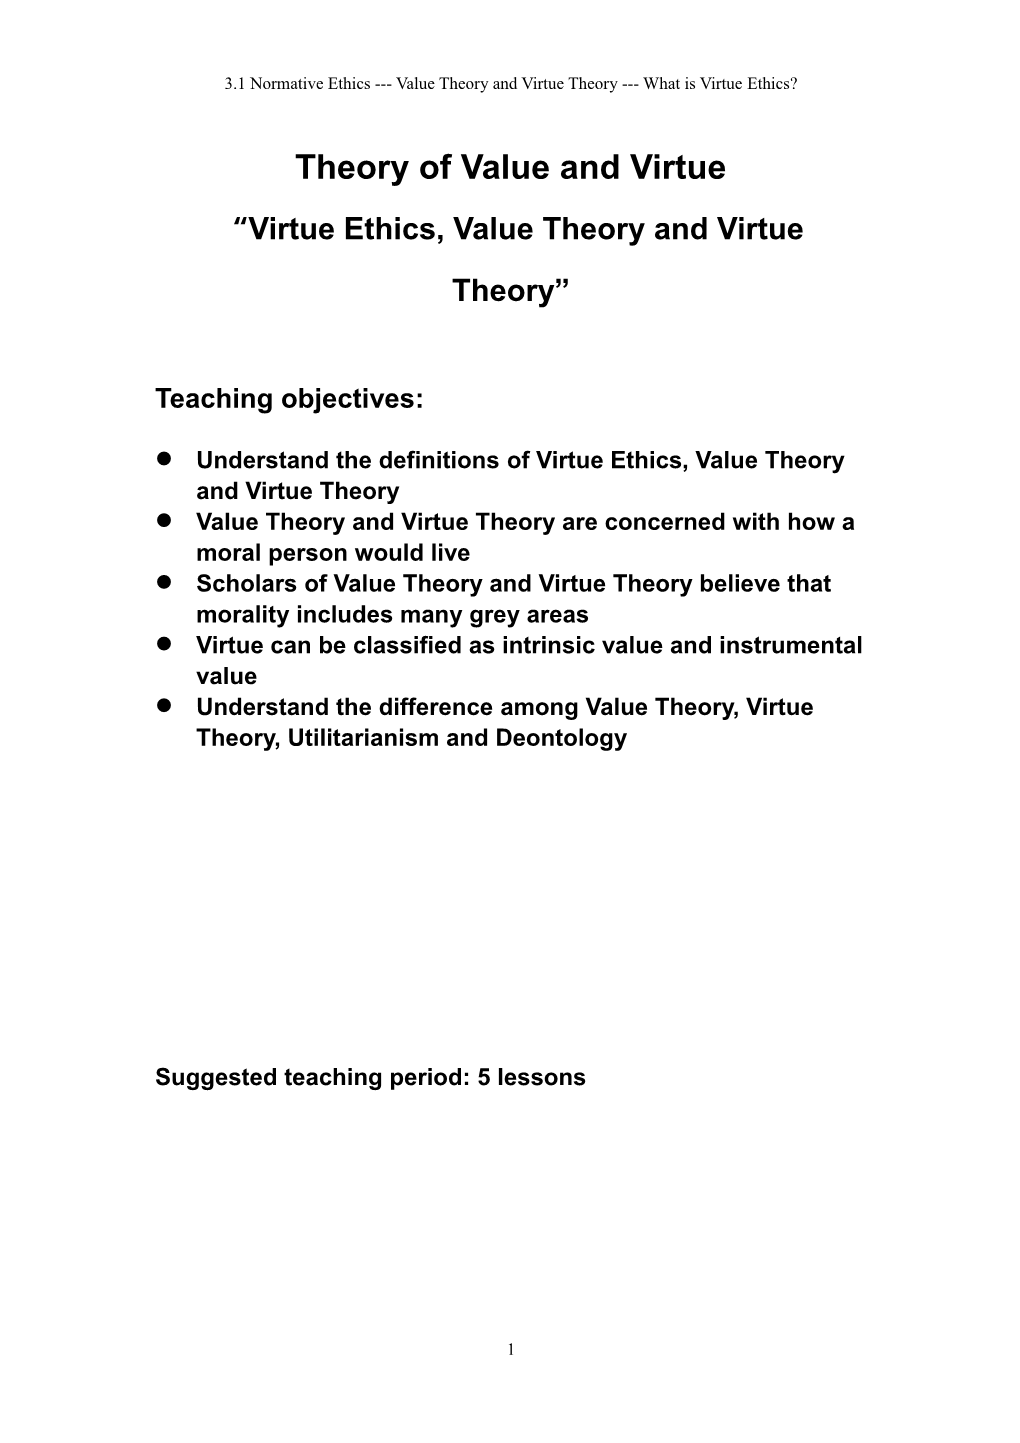 Virtue Ethics, Value Theory and Virtue Theory